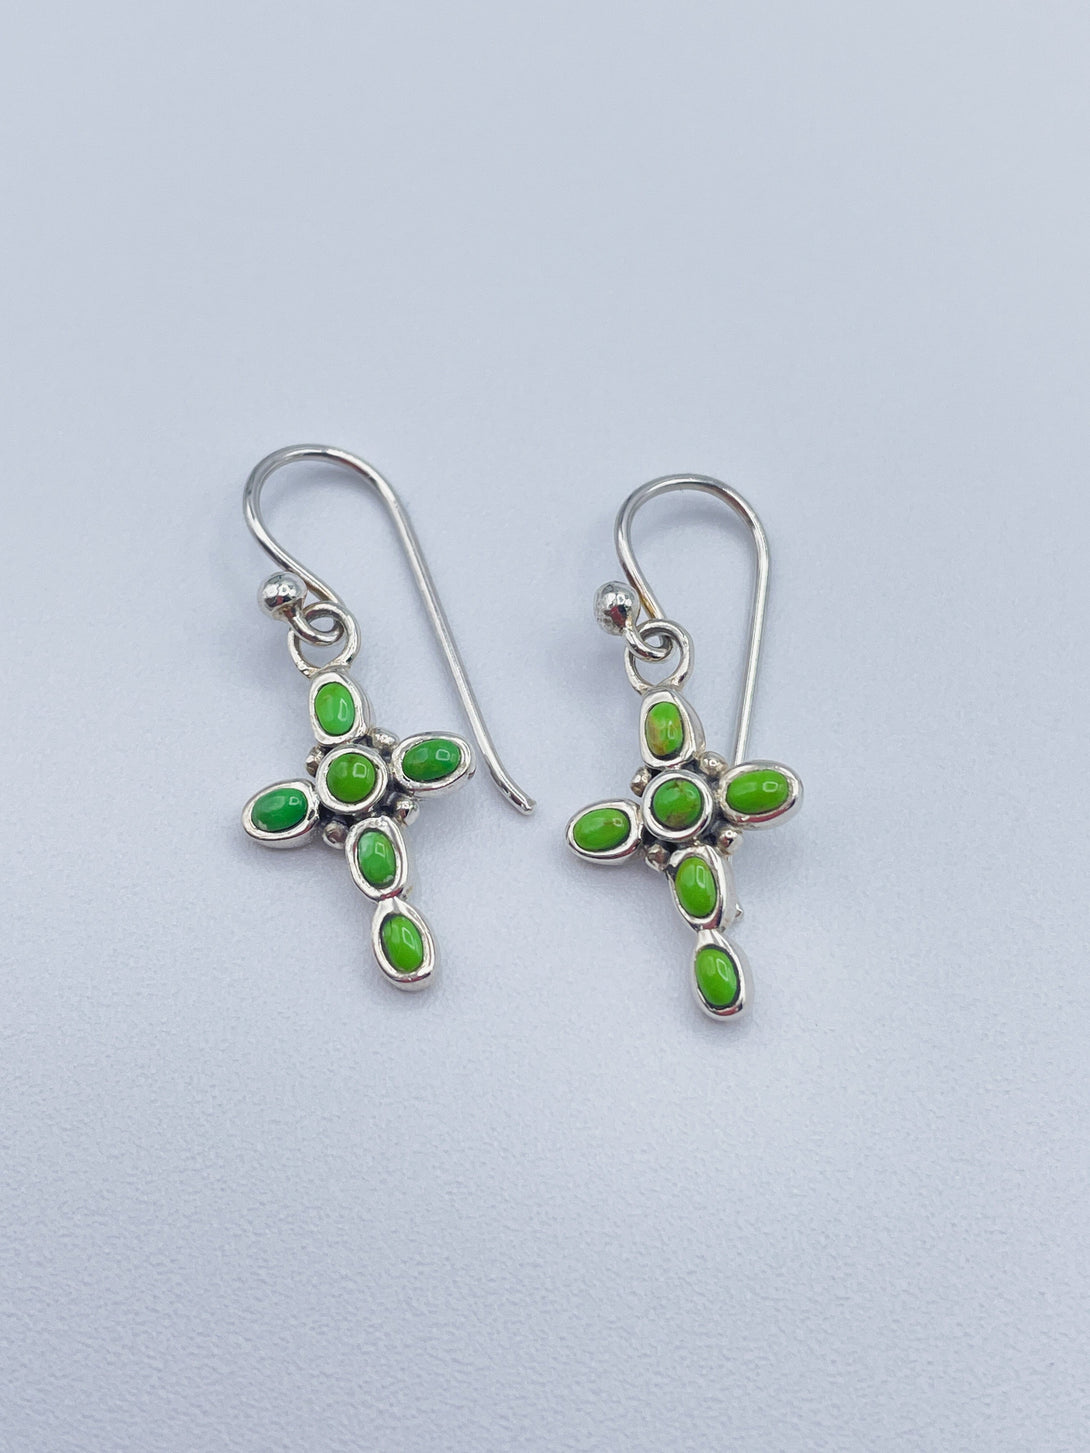 Women's Cross Earrings Made with Green Turquoise and Sterling Silver